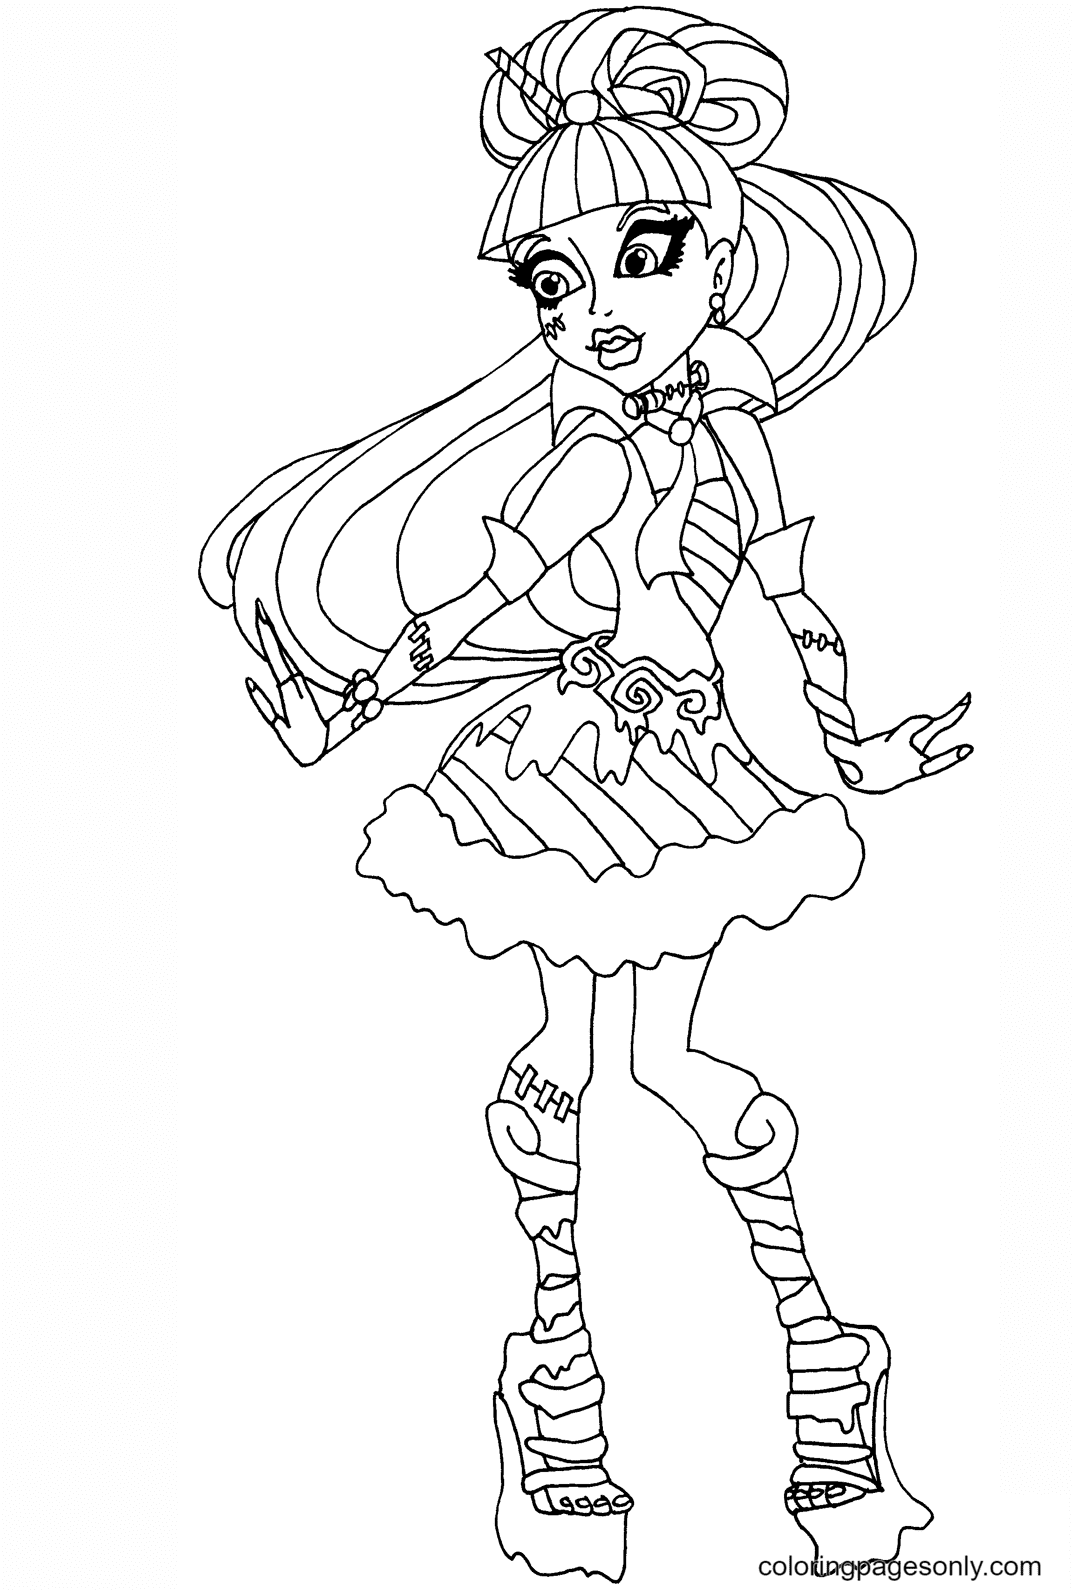 Monster High Coloring Pages - Coloring Pages For Kids And Adults